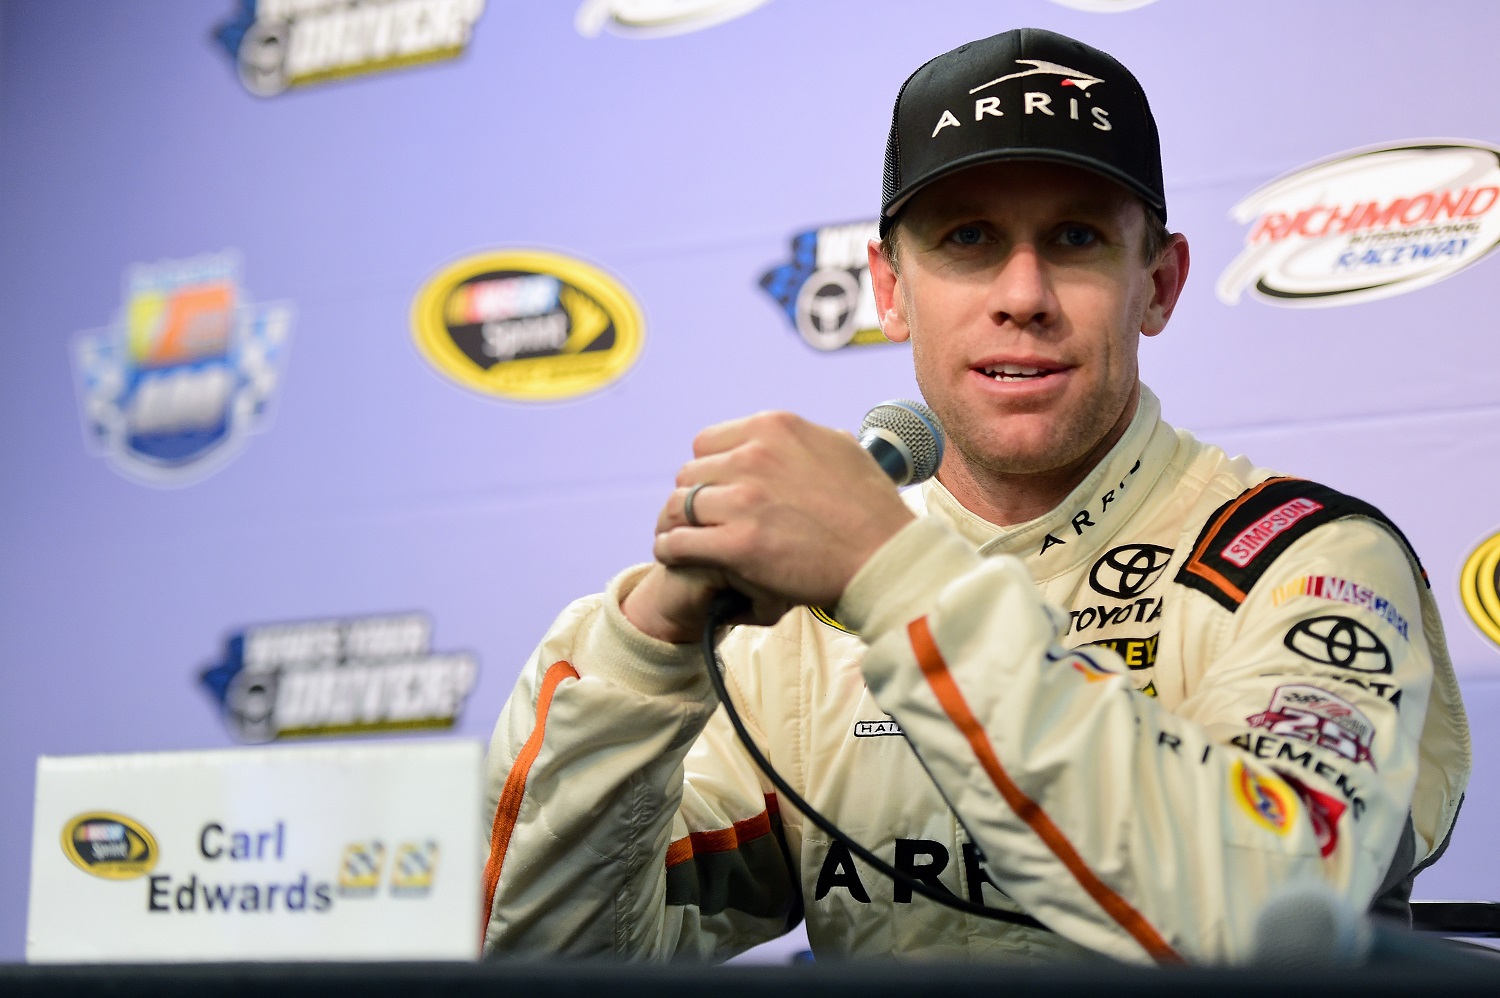 Carl Edwards speaks with the media after practice for the NASCAR Sprint Cup Series race at Richmond International Raceway on Sept. 9, 2016.